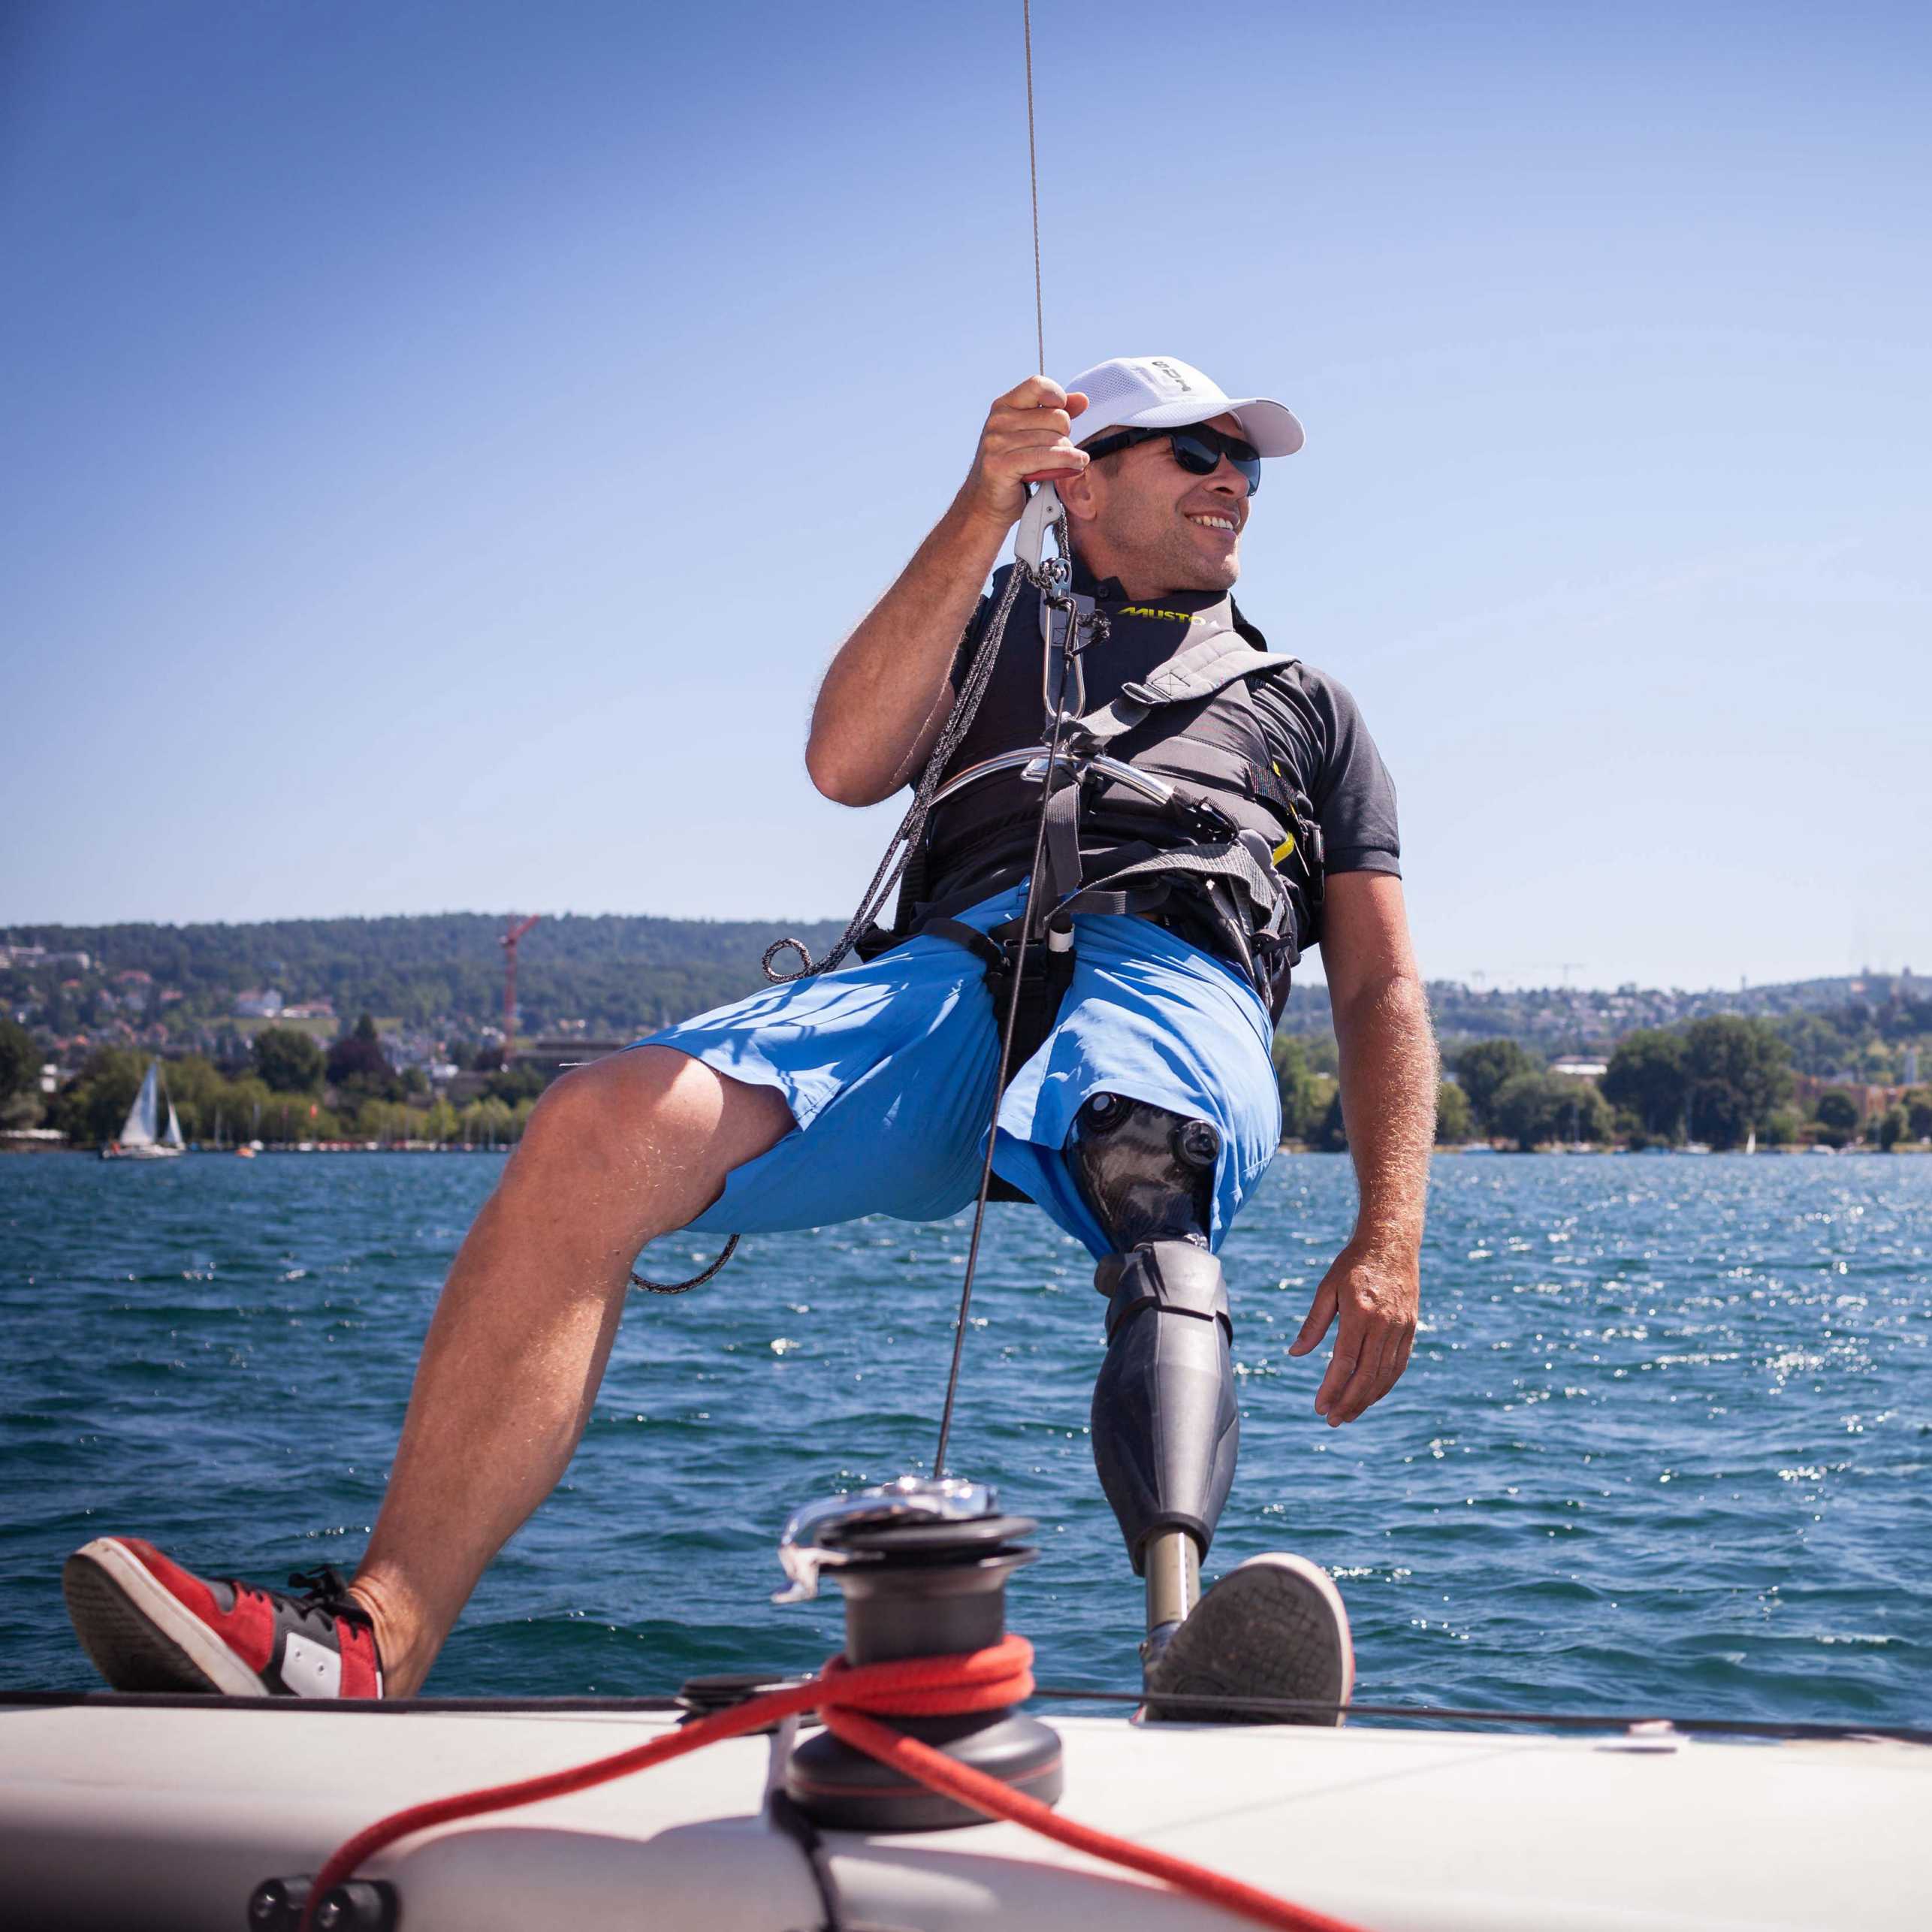 Enlarged view: Filip Pockelé with prosthetic leg hangs sideways from sailboat in trapeze